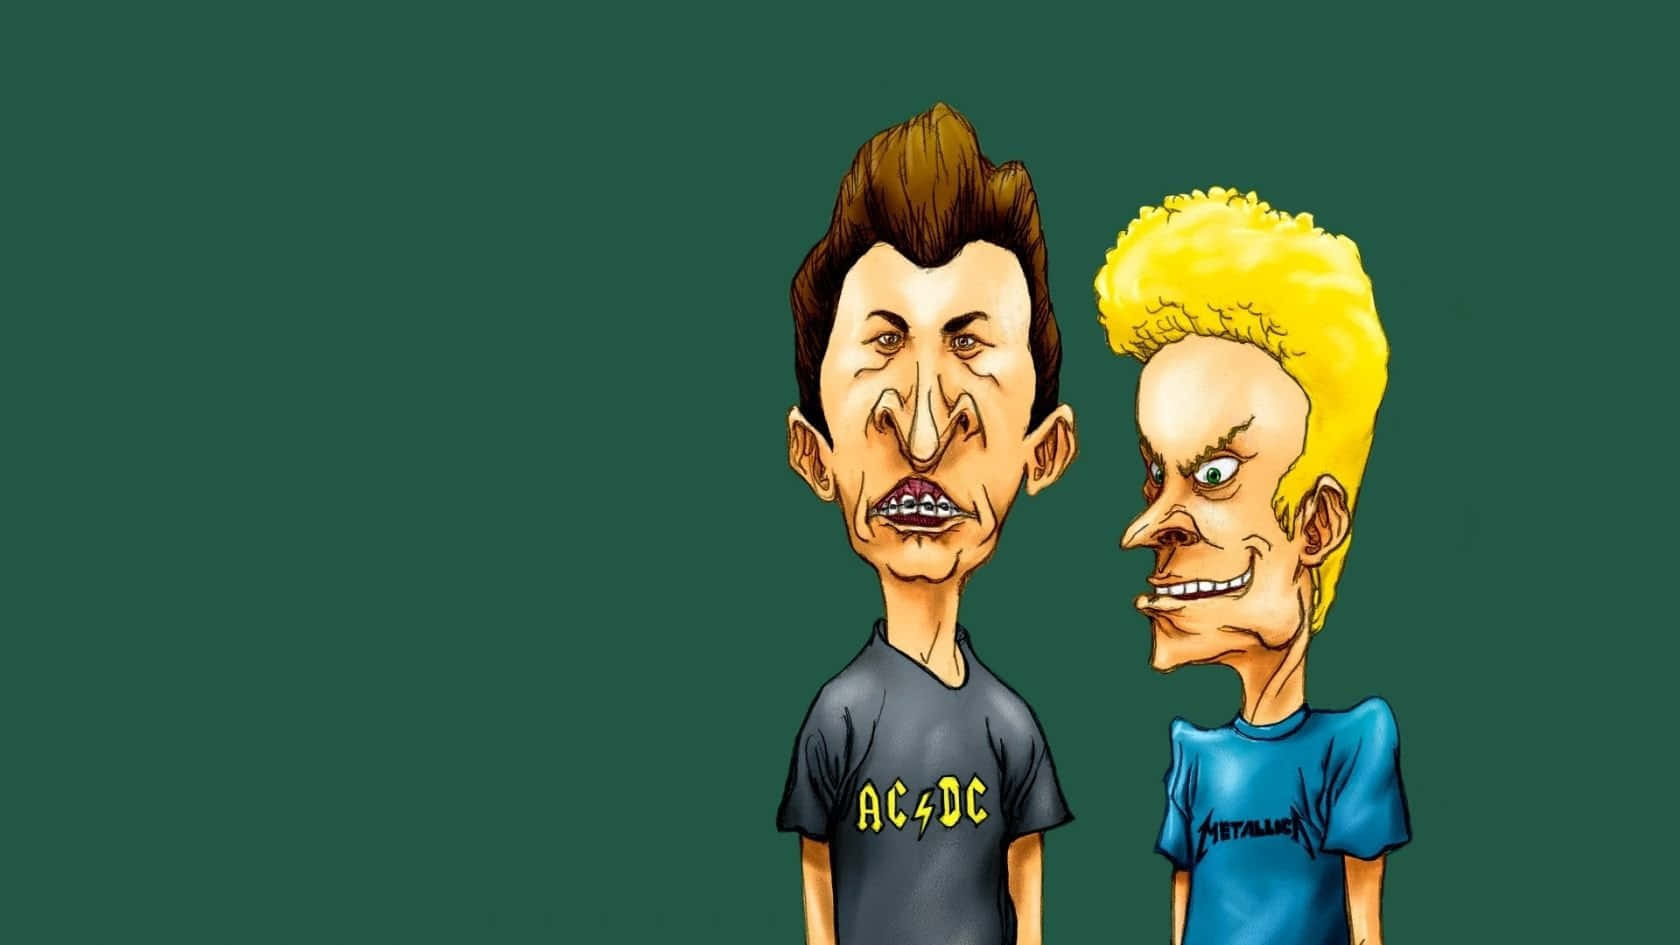 Beavis and Butthead put their unique comedic twist on the world